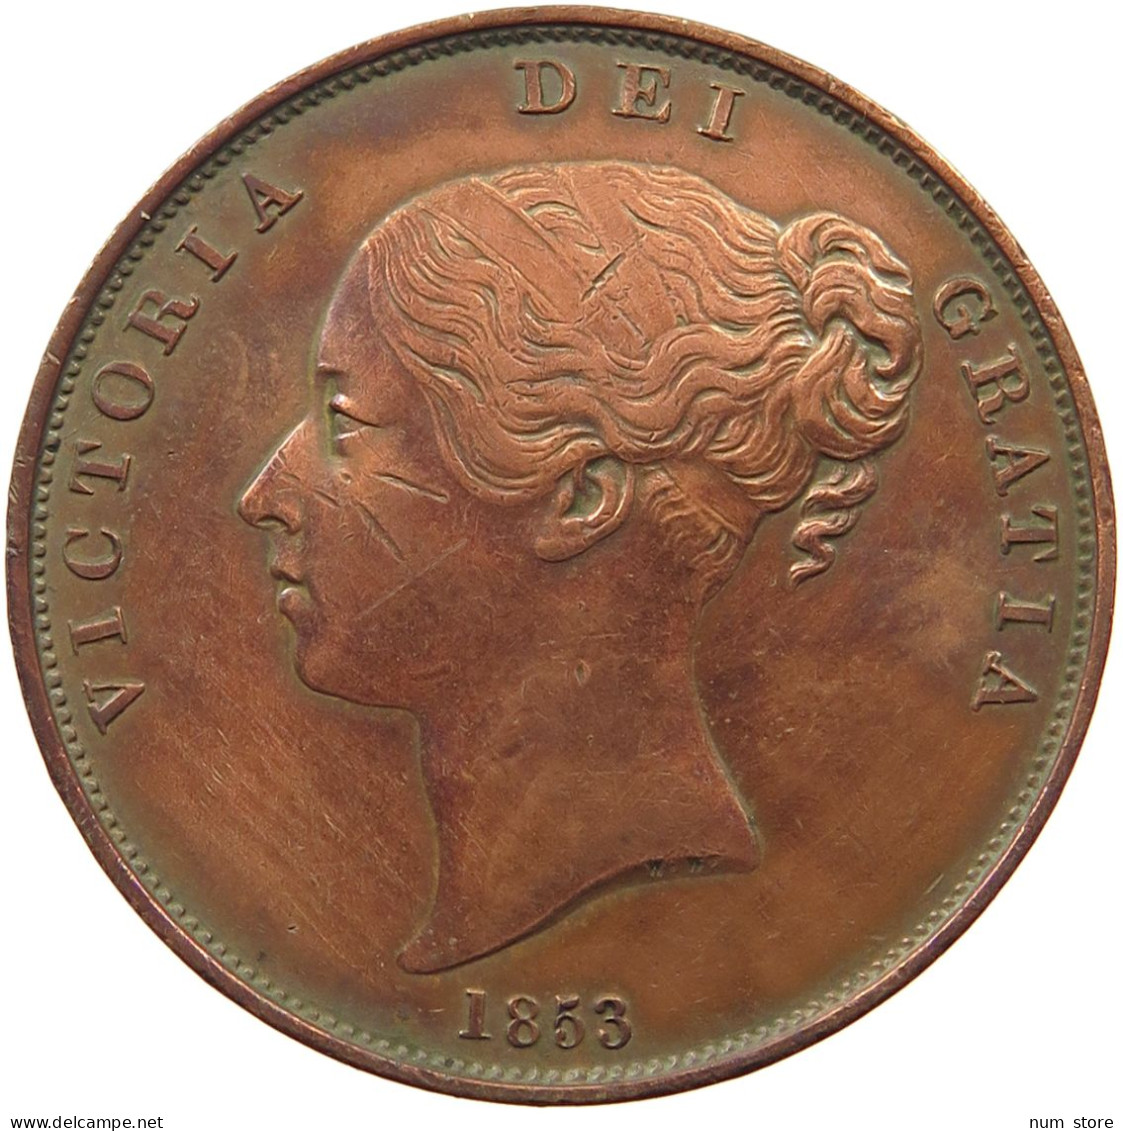 GREAT BRITAIN PENNY 1853 VICTORIA 1837 - 1901 #MA 004678 - D. 1 Penny